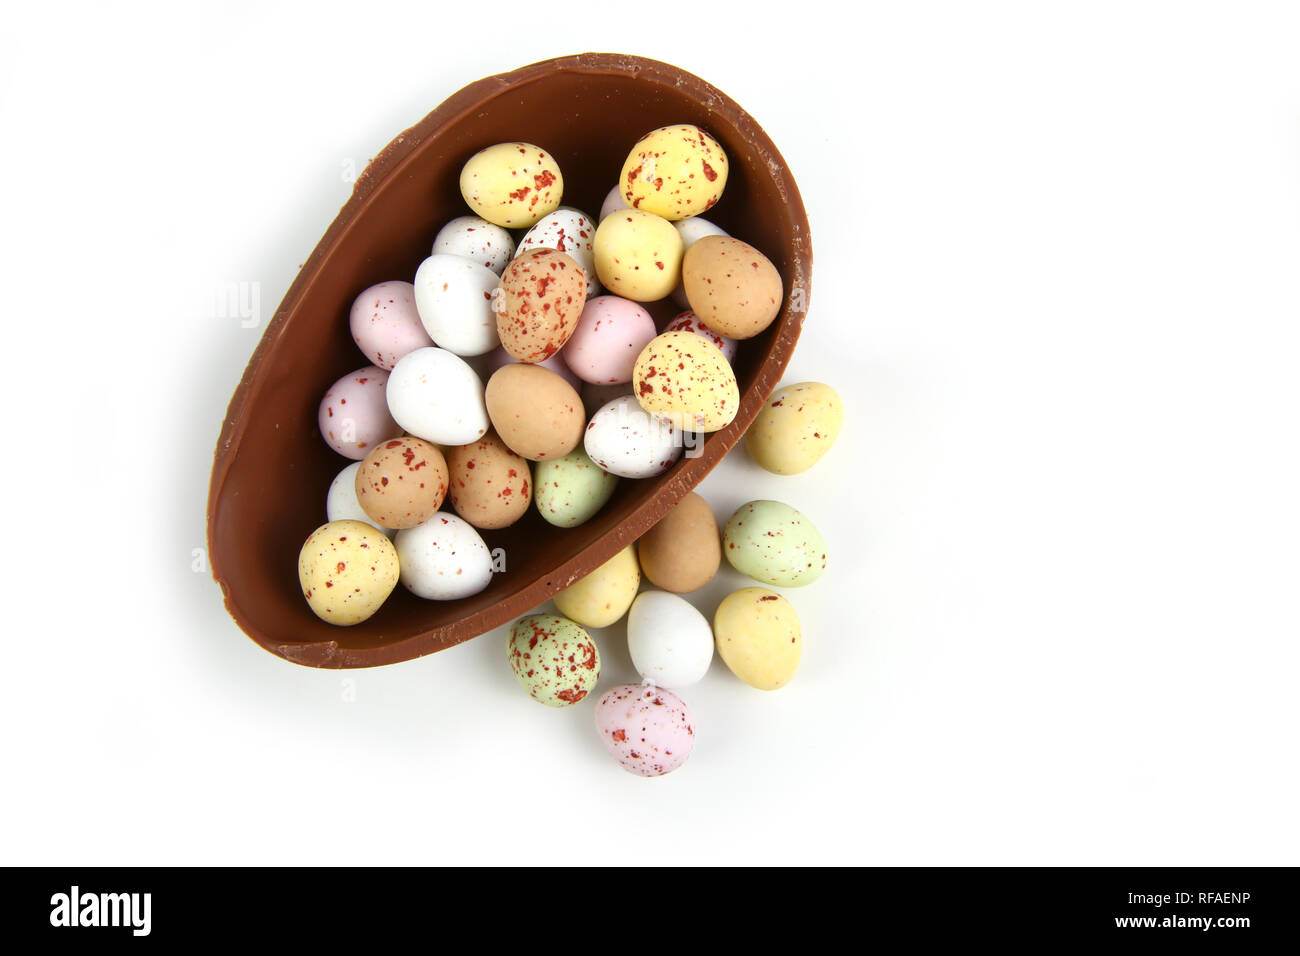 Chocolate mini Easter eggs in half a large chocolate egg basket against a white background Stock Photo